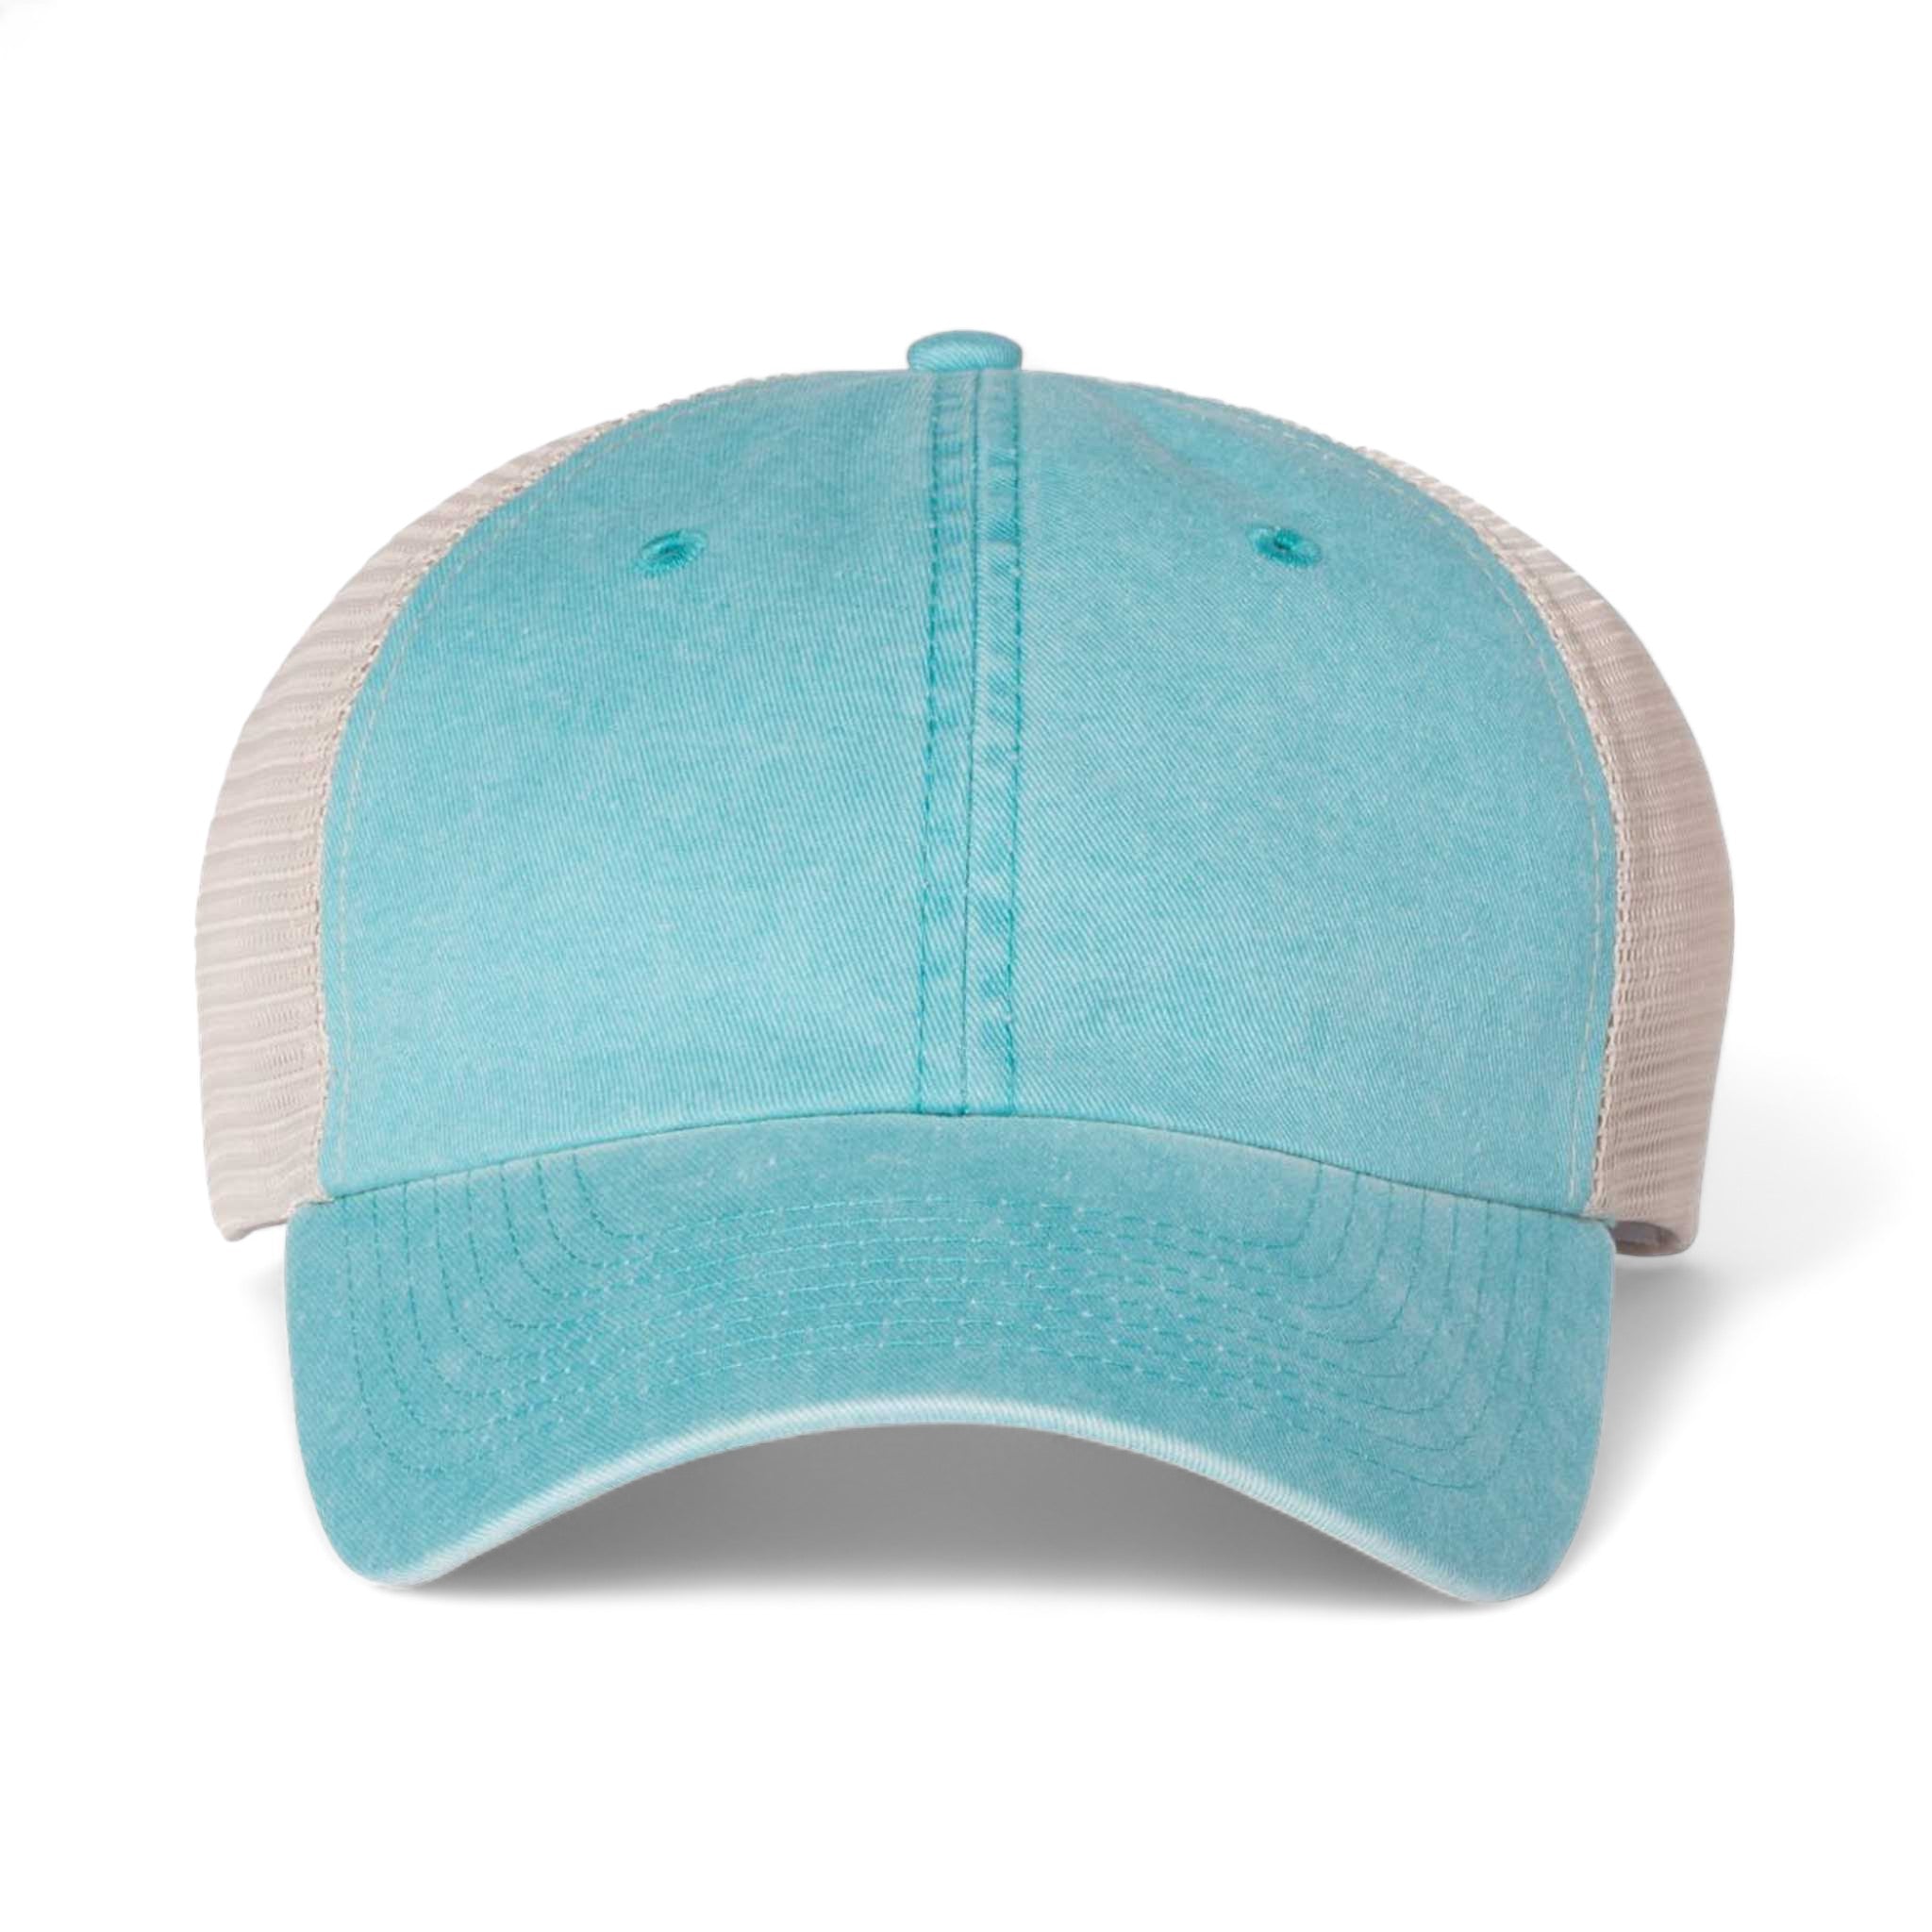 Front view of Sportsman SP510 custom hat in aqua and stone